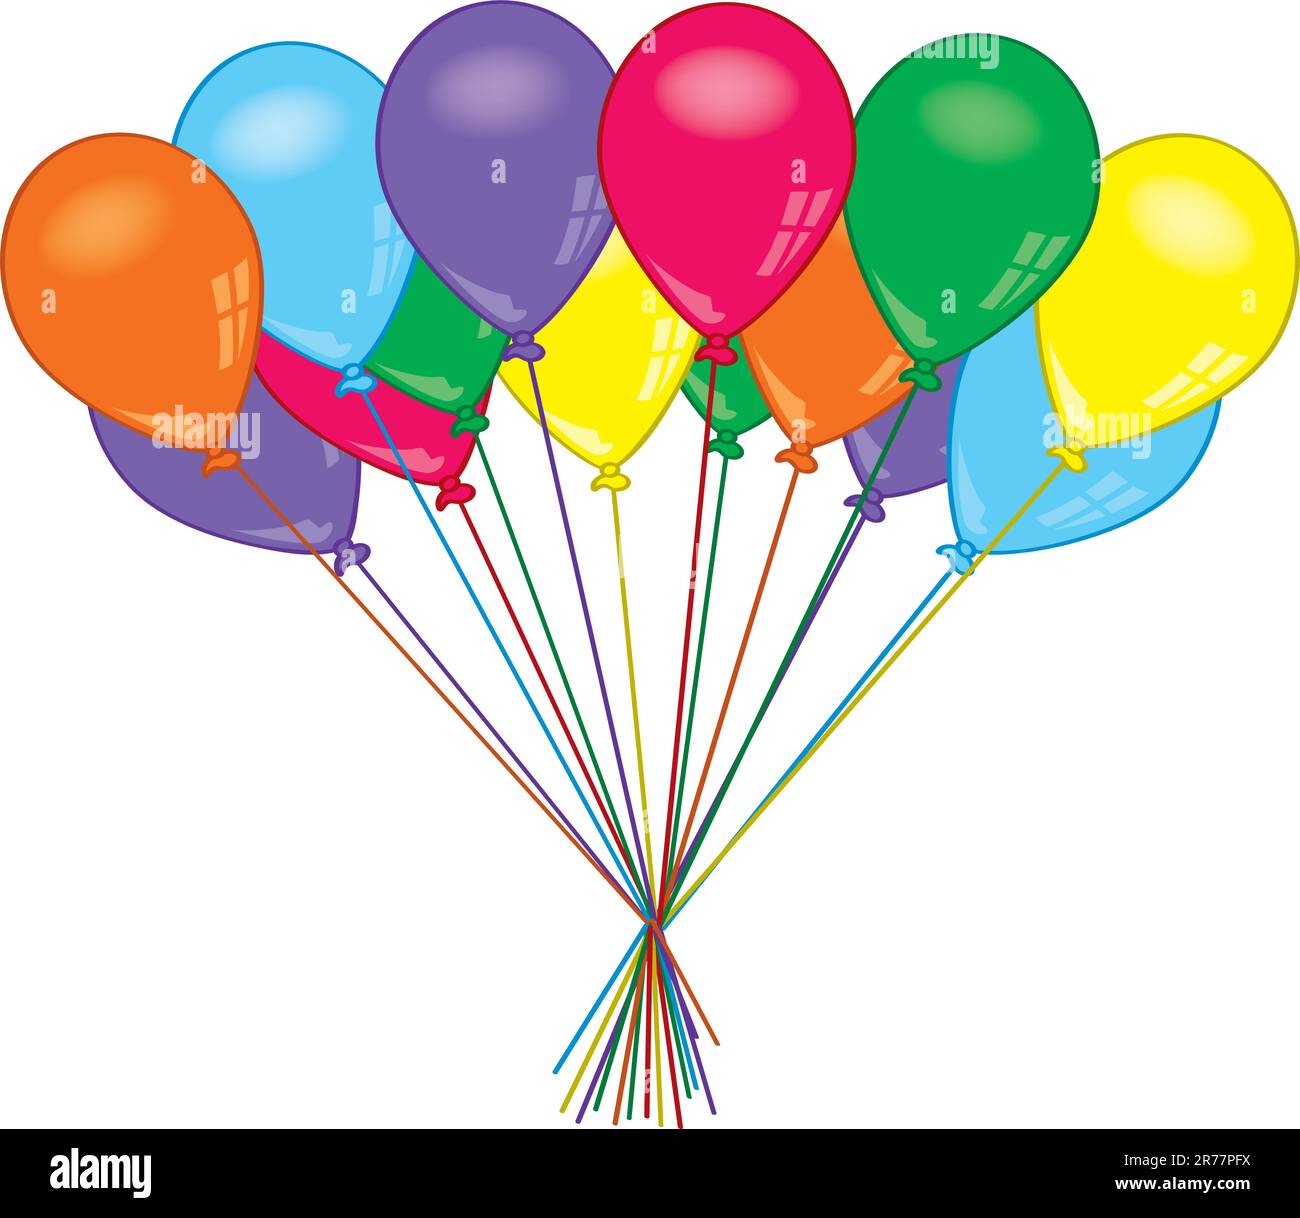 A bundle of colorful balloons on strings. Stock Vector